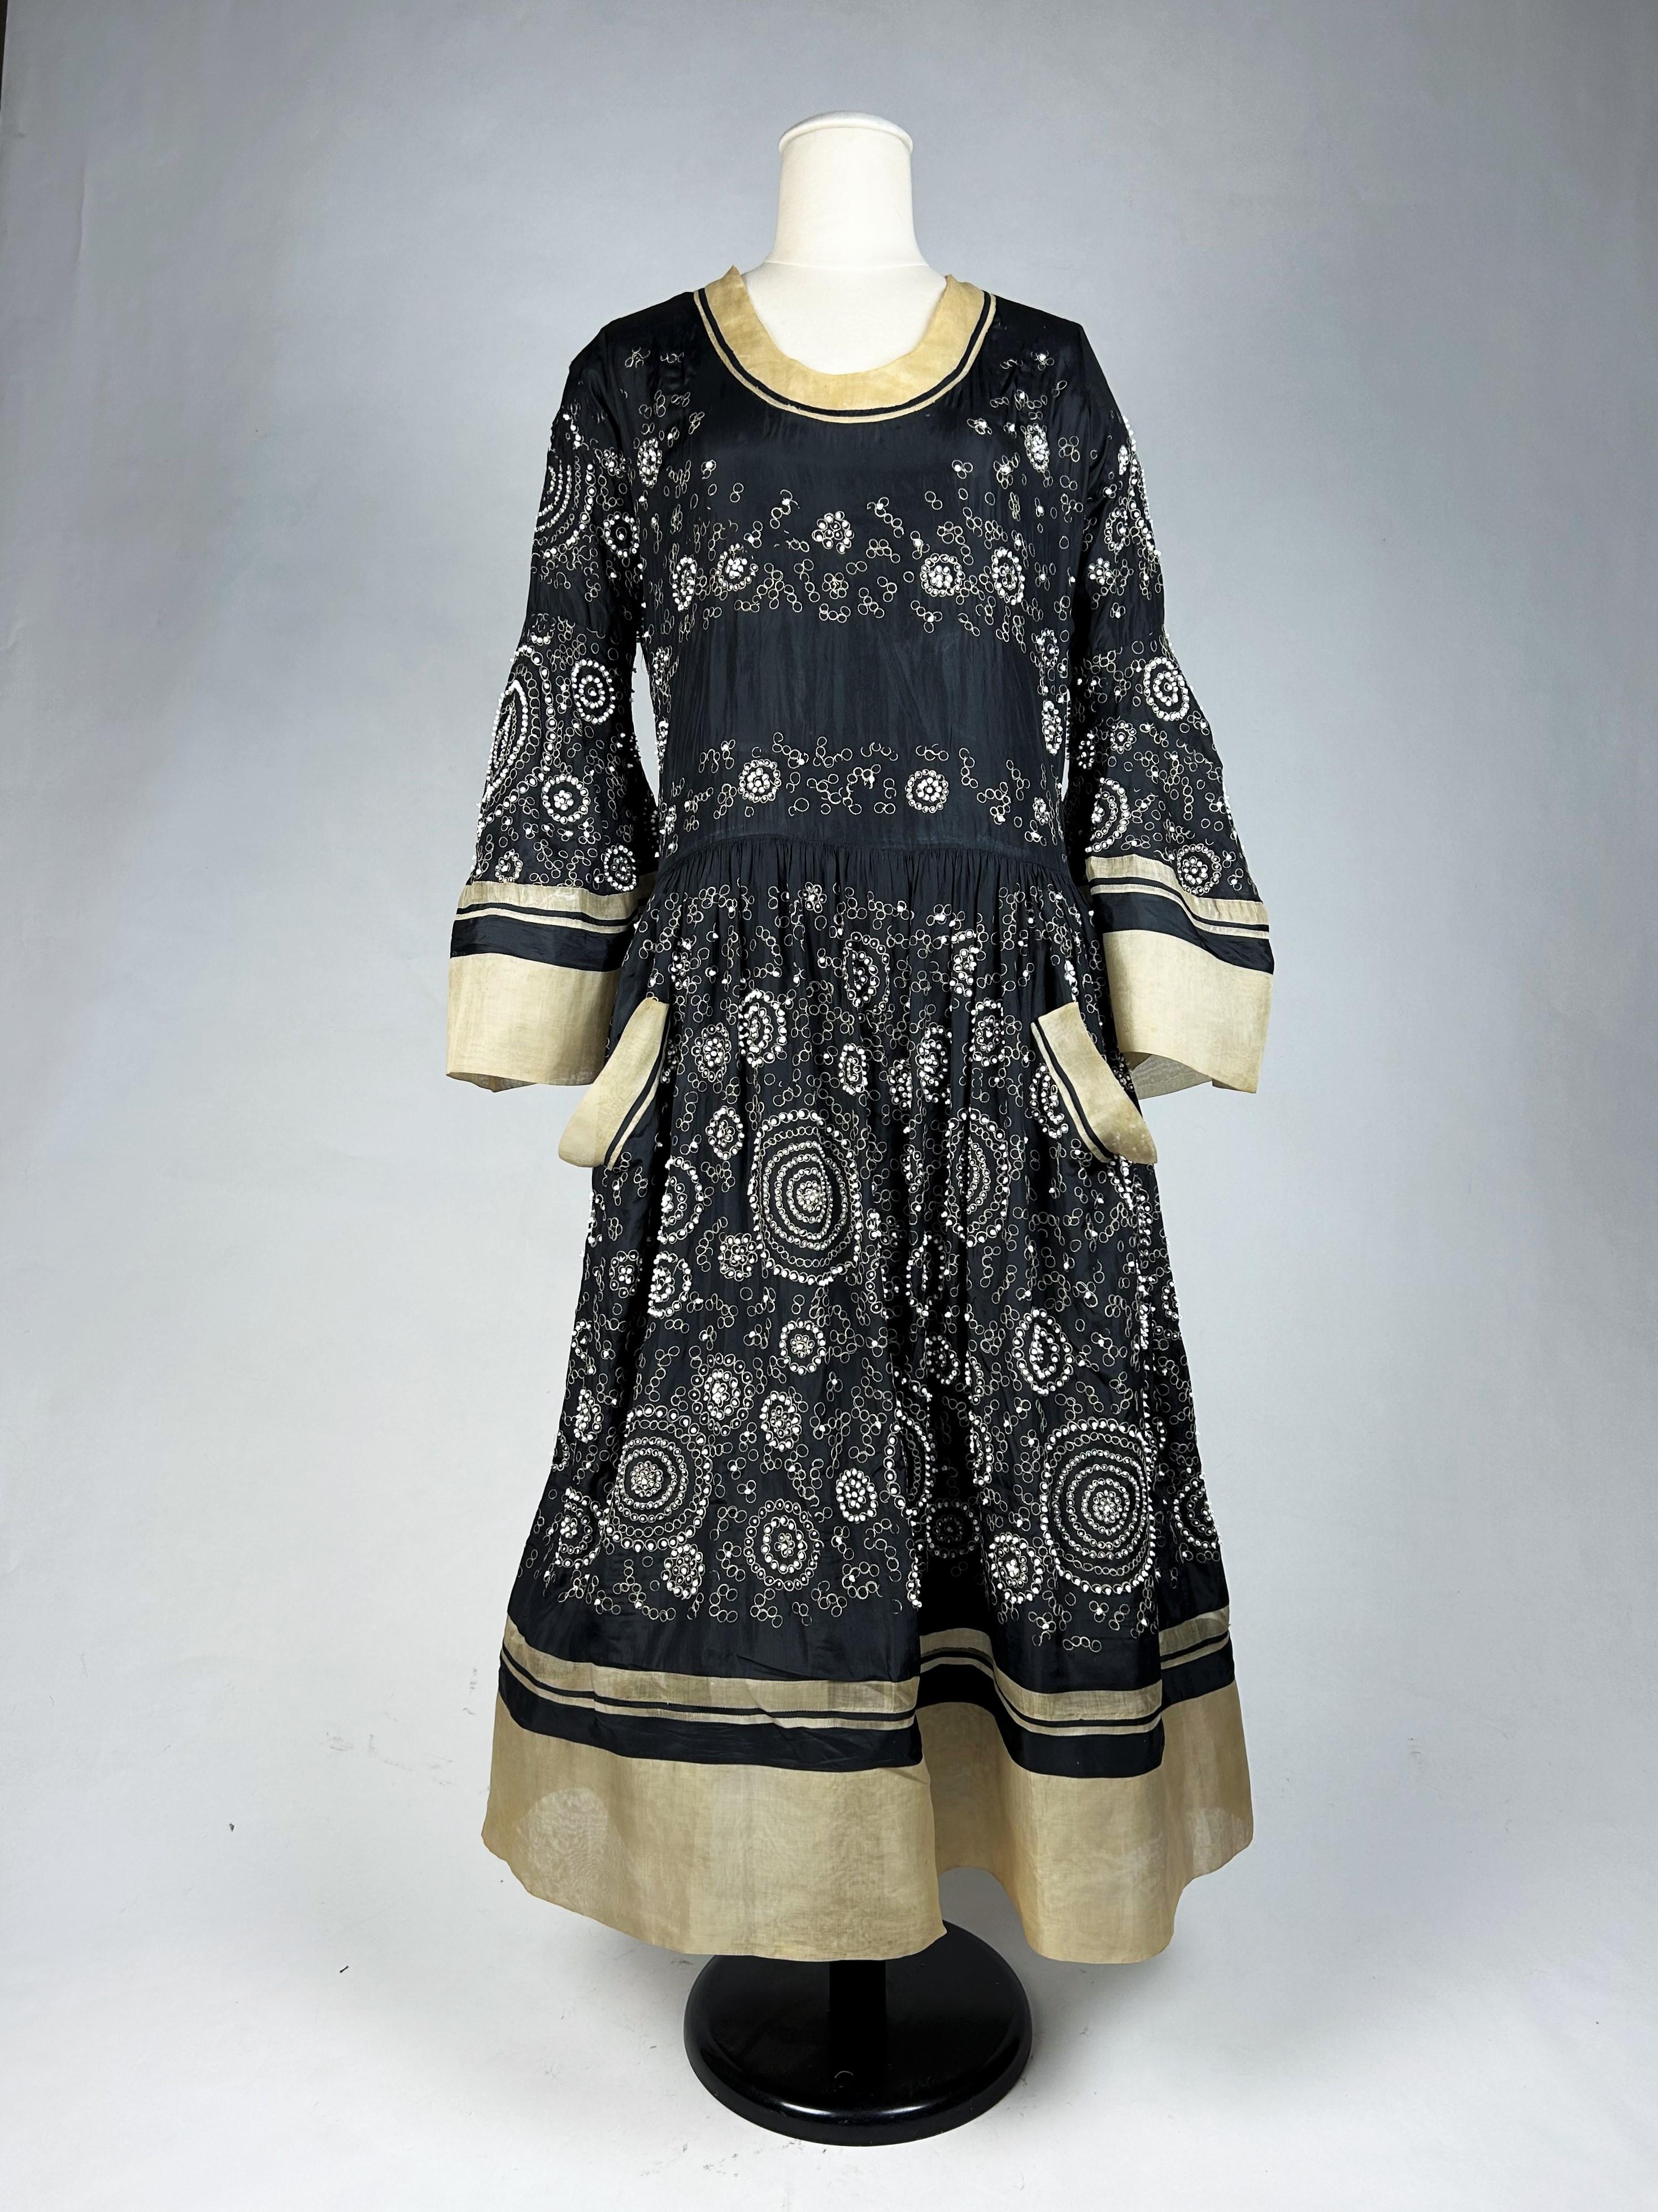 Women's Evening dress by Jeanne Lanvin Haute Couture numbered 66780- Paris Summer 1924 For Sale